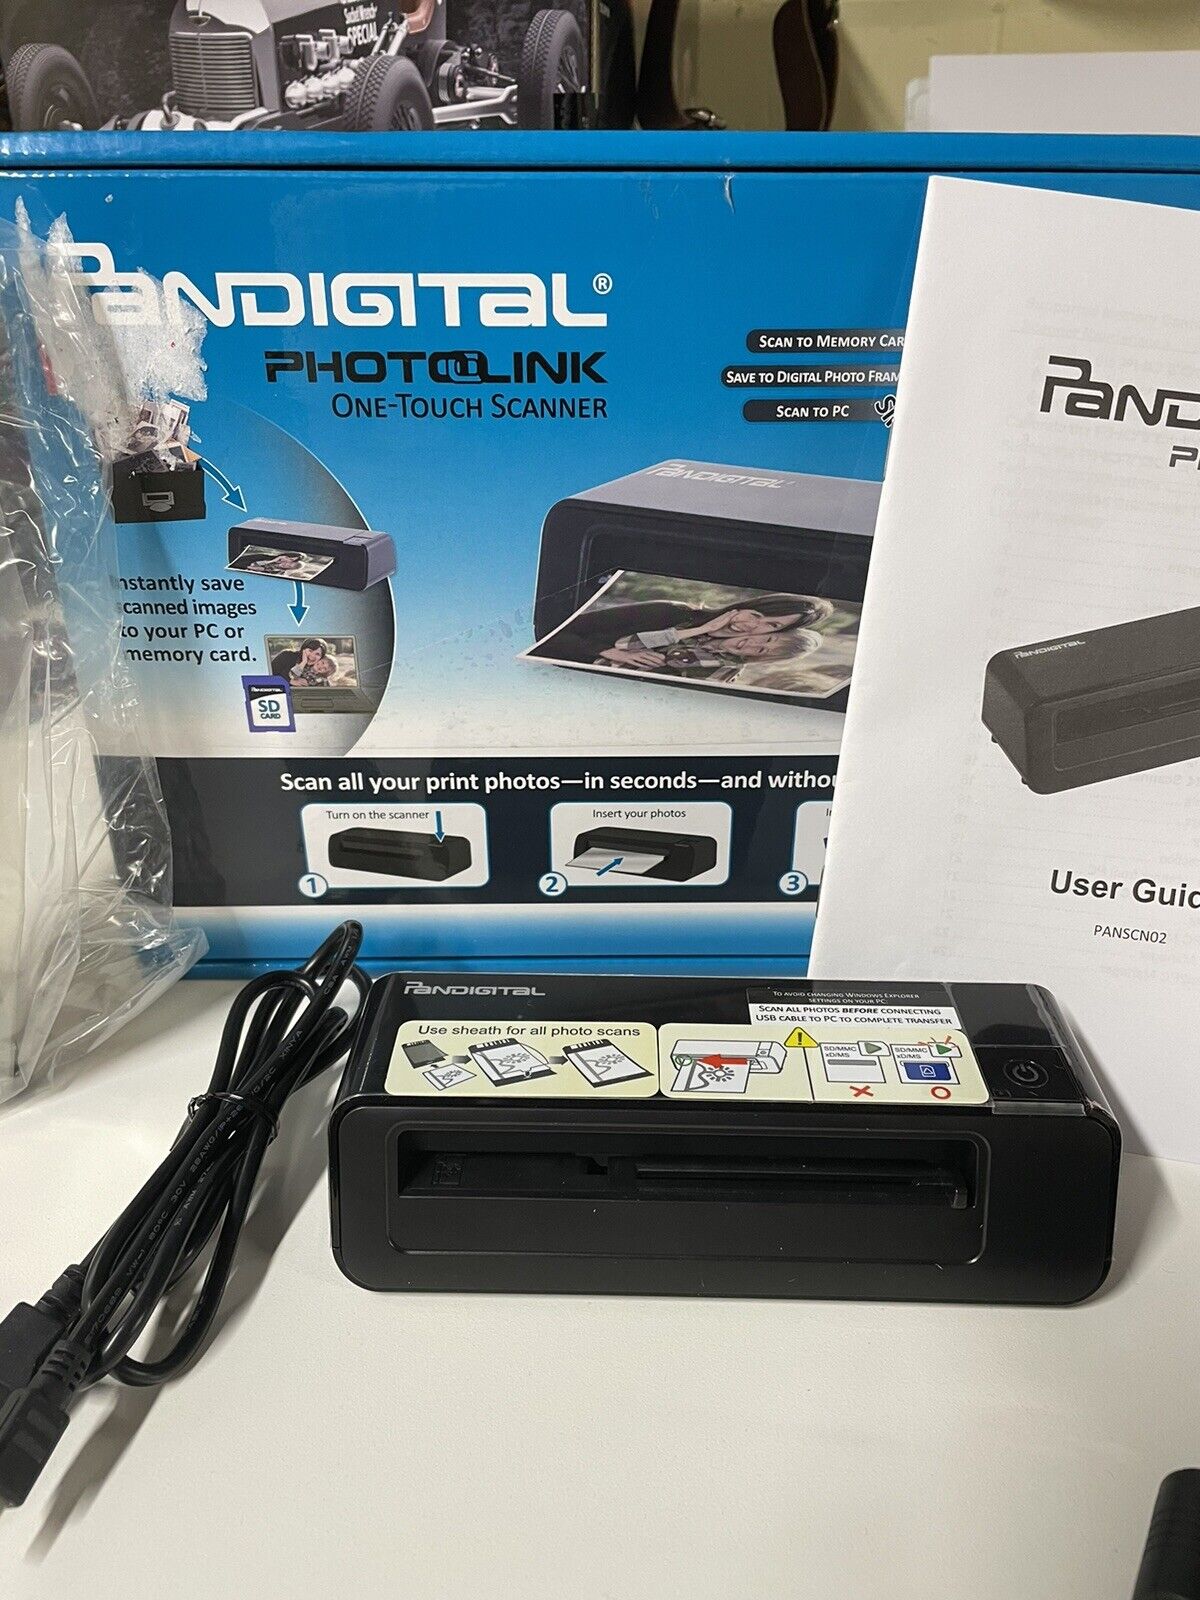 Pandigital PhotoLink One-Touch Scanner No PC required Simple One Touch